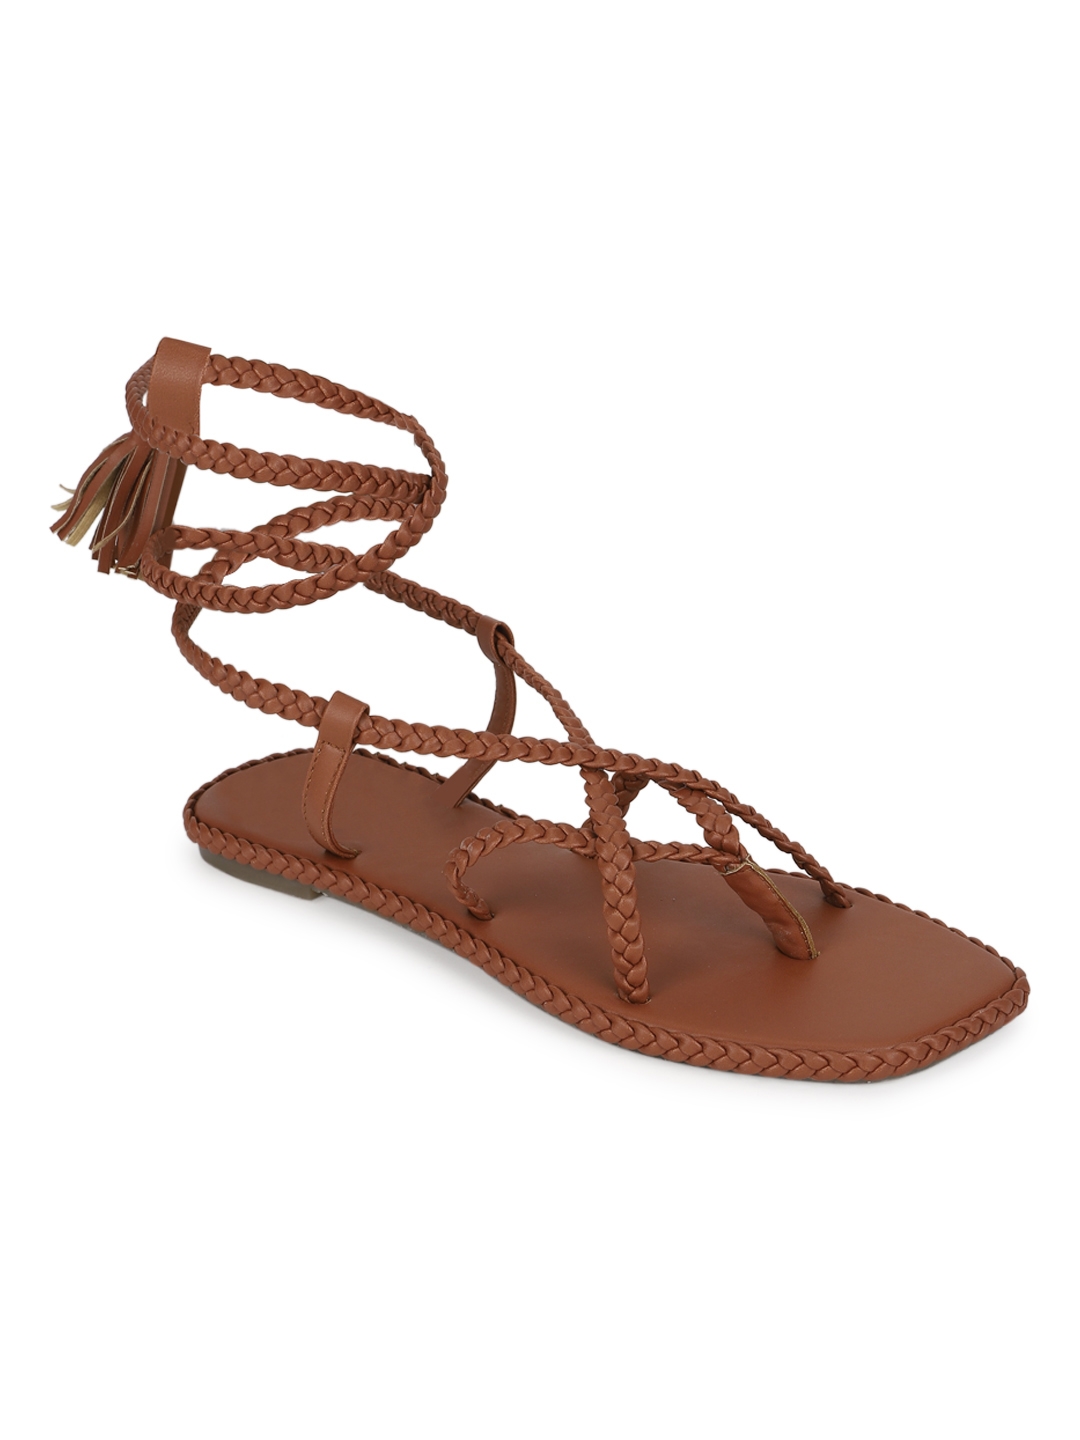 Truffle Collection | Tan PU Braided Lace Up Flat Sandals